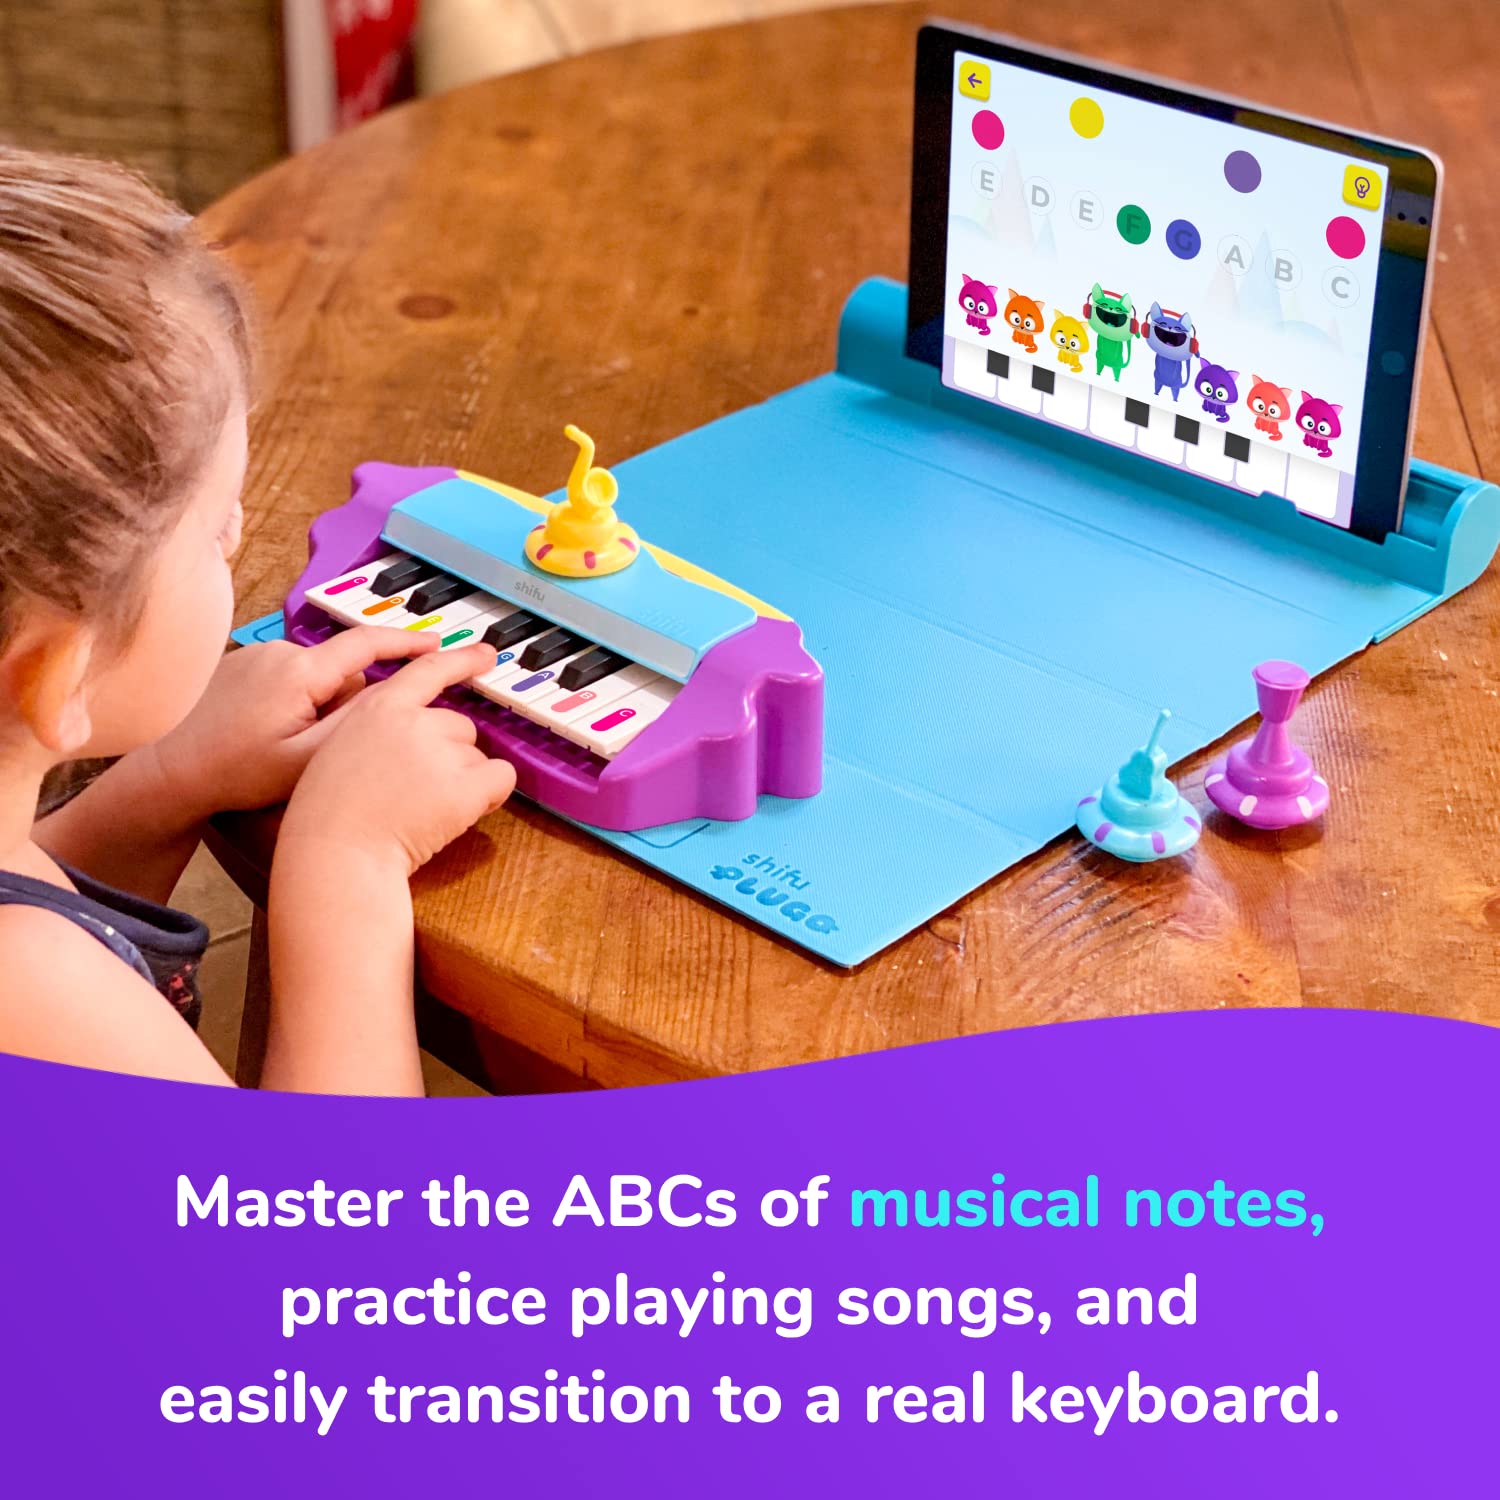 Plugo Tunes by PlayShifu - Piano Learning Kit | Musical STEAM Toy for Ages 4-10 - Music Instruments Gift for Boys & Girls (Works with iPads, iPhones, Samsung tabs/Phones, Kindle Fire)